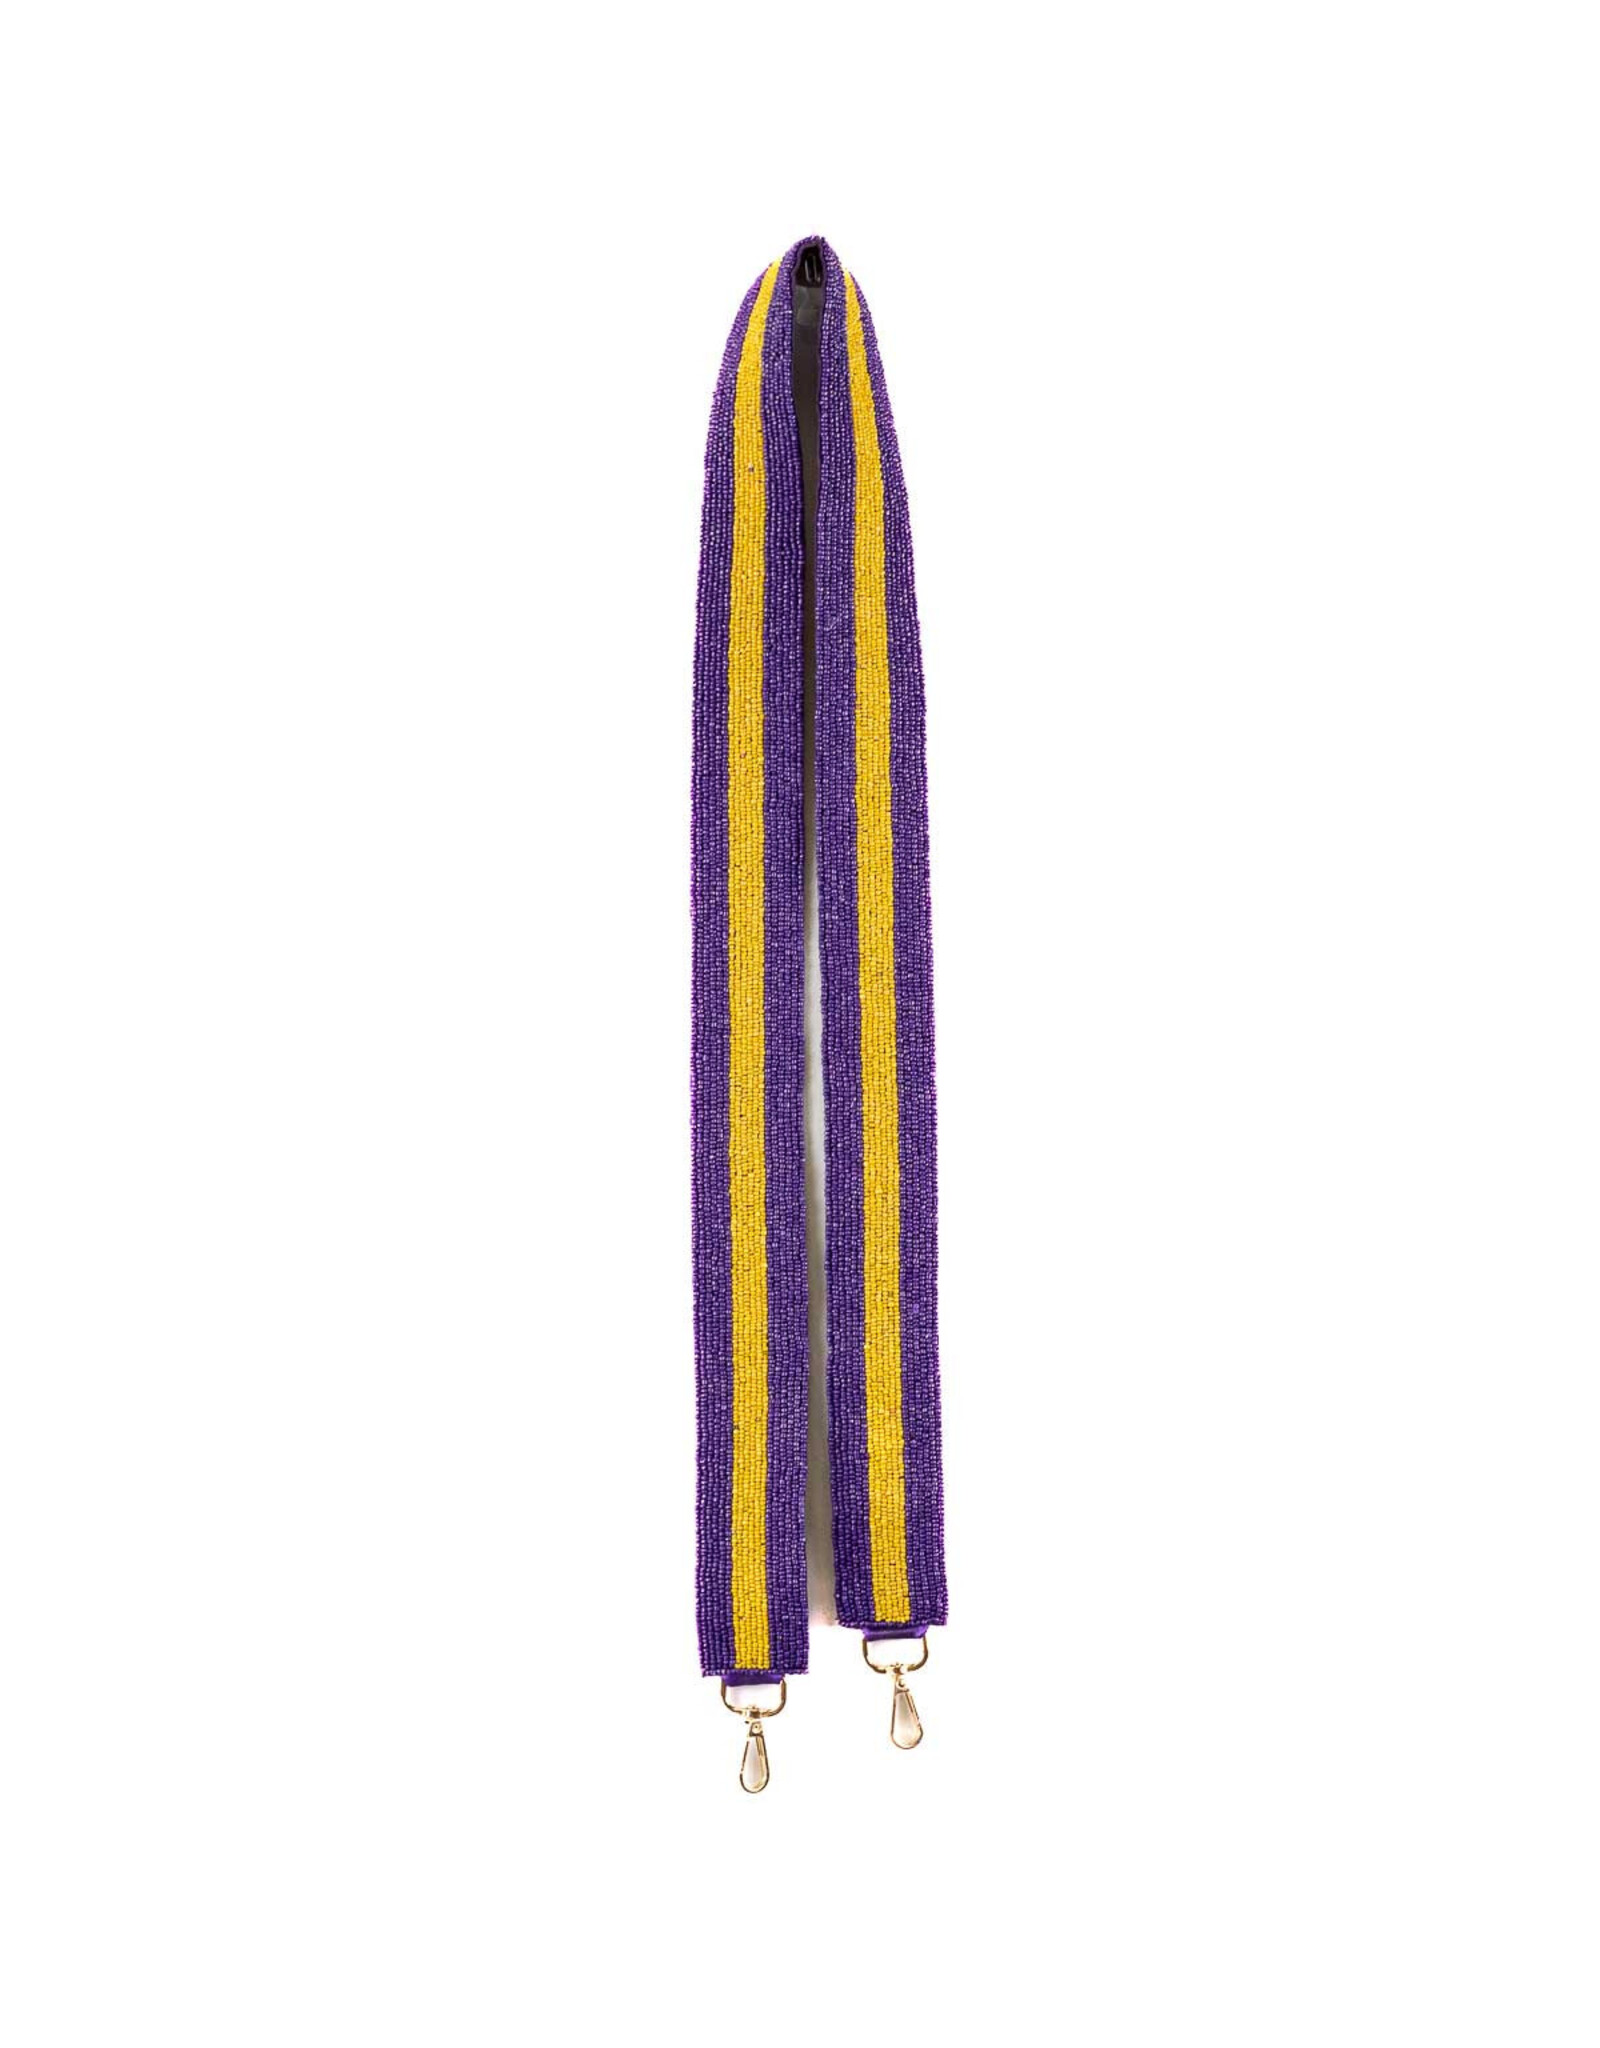 The Royal Standard Gameday Stripe Beaded Purse Strap - Purple and Gold